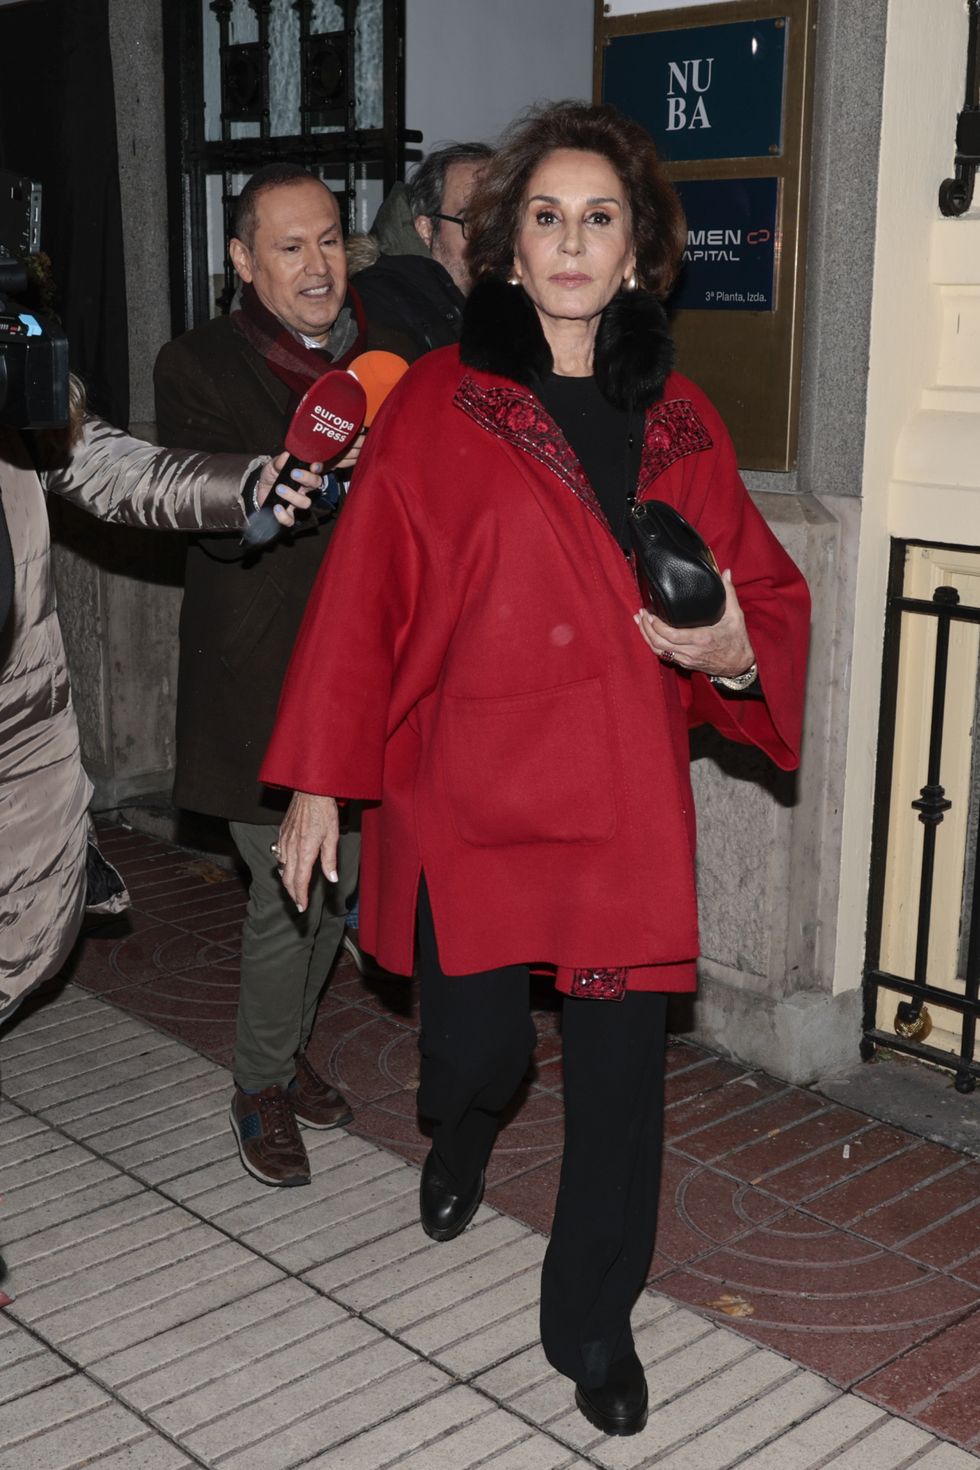 nati abascal at photocall for maribelyebenes event in madrid on tuesday, 16 january 2024